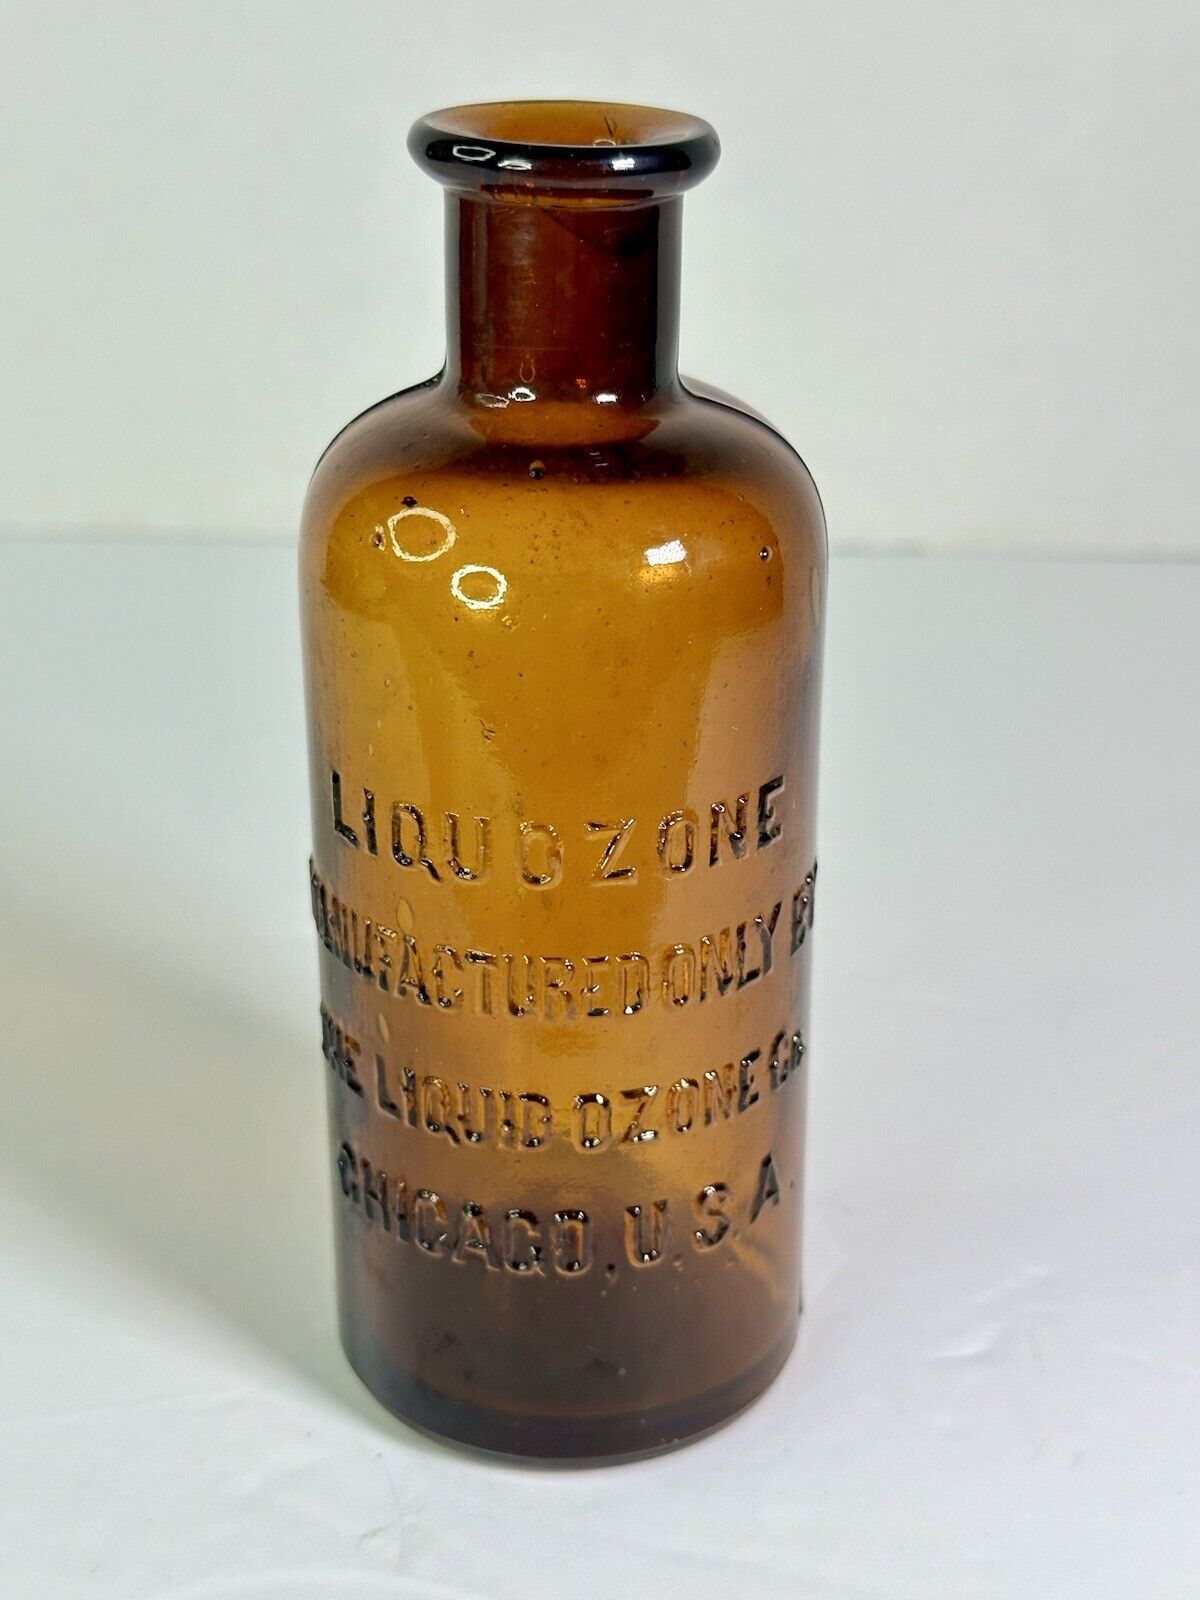 Liquozone Chicago USA Amber Antique Bottle Late 19th Early 20th Century